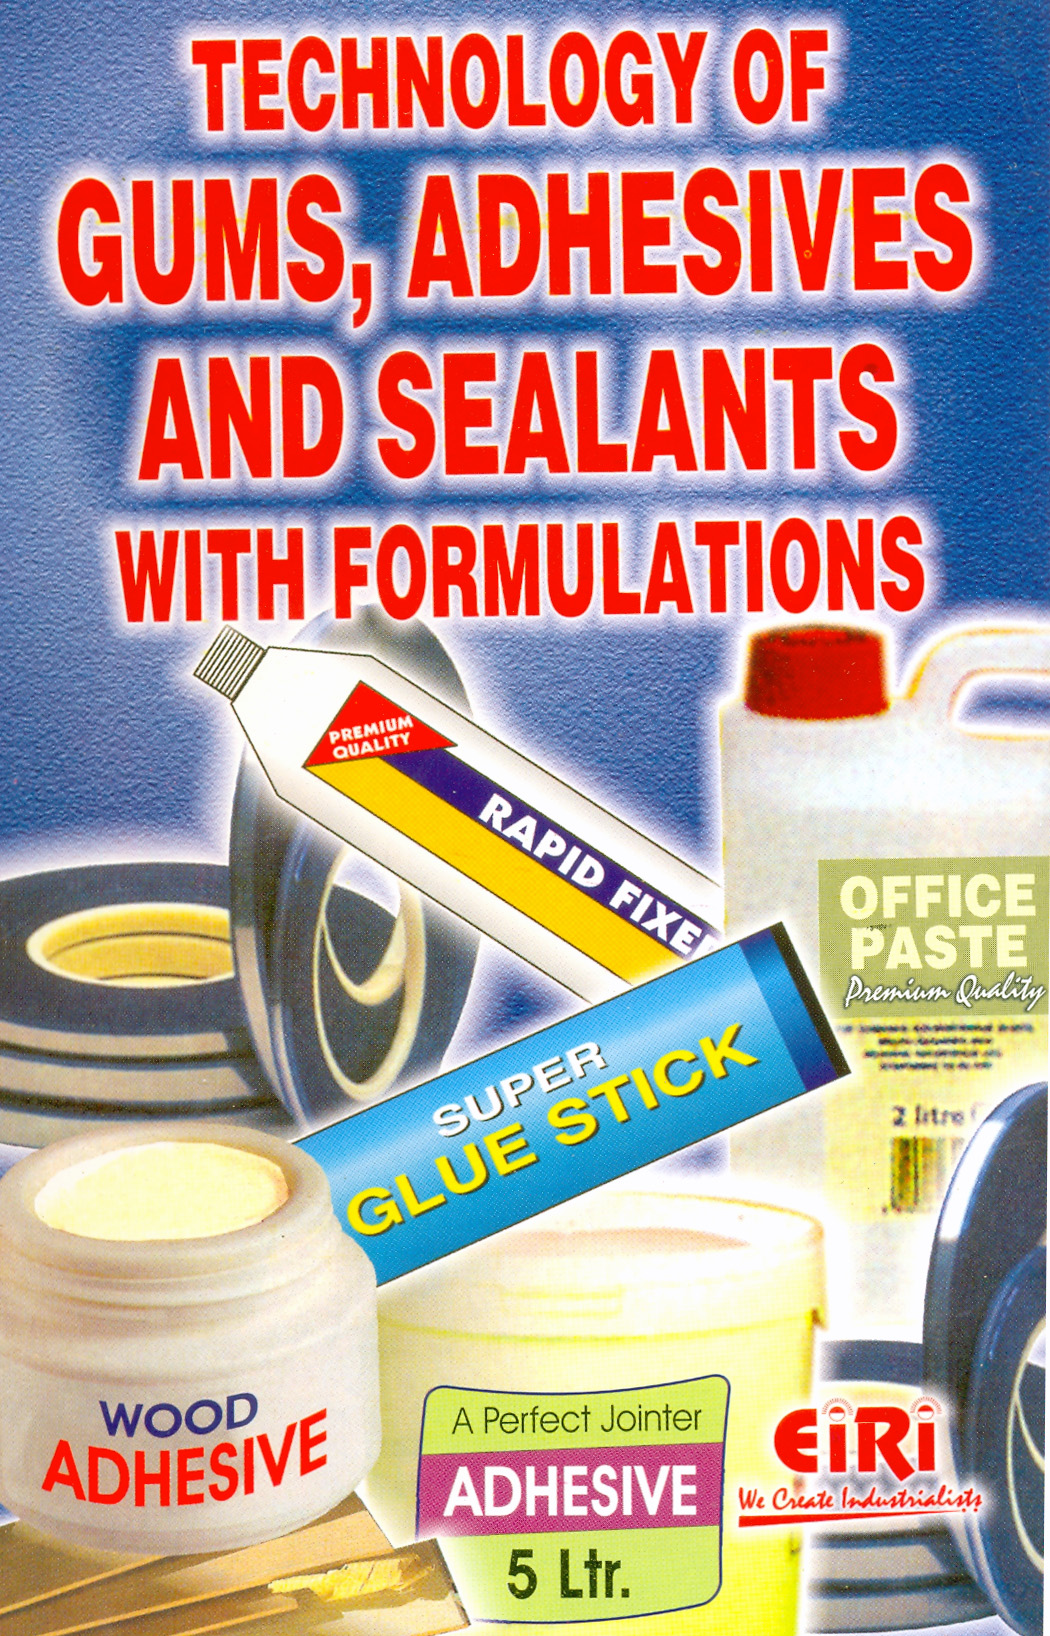 Hand Book and Formulations on Technology of Gums, Adhesives and Sealants  with Complete Process Detail